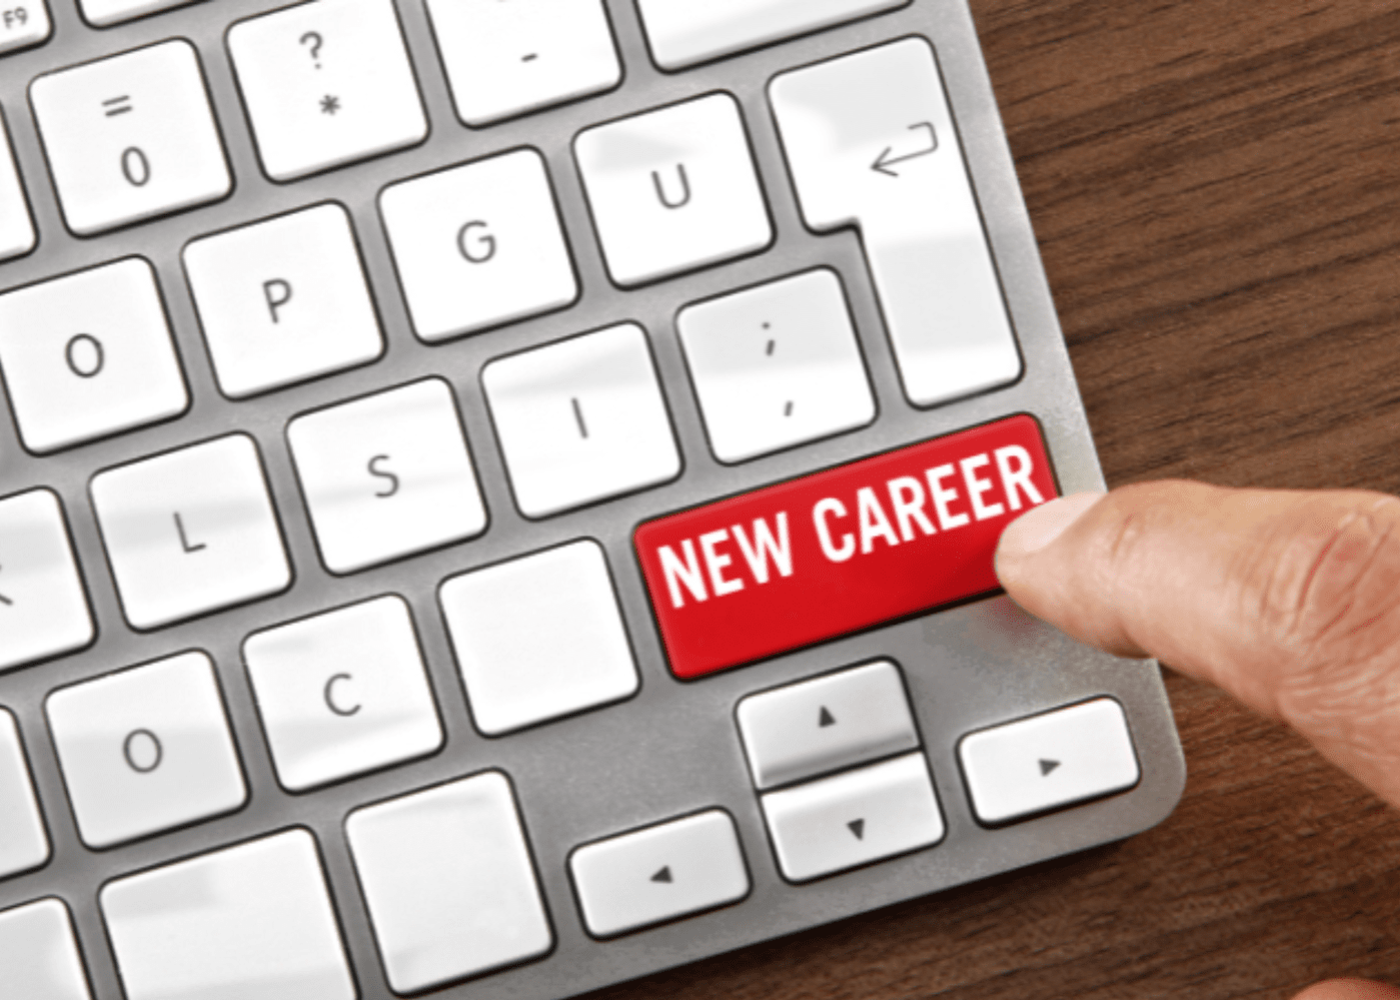 Keyboard with a button that says "career" being pushed by a finger